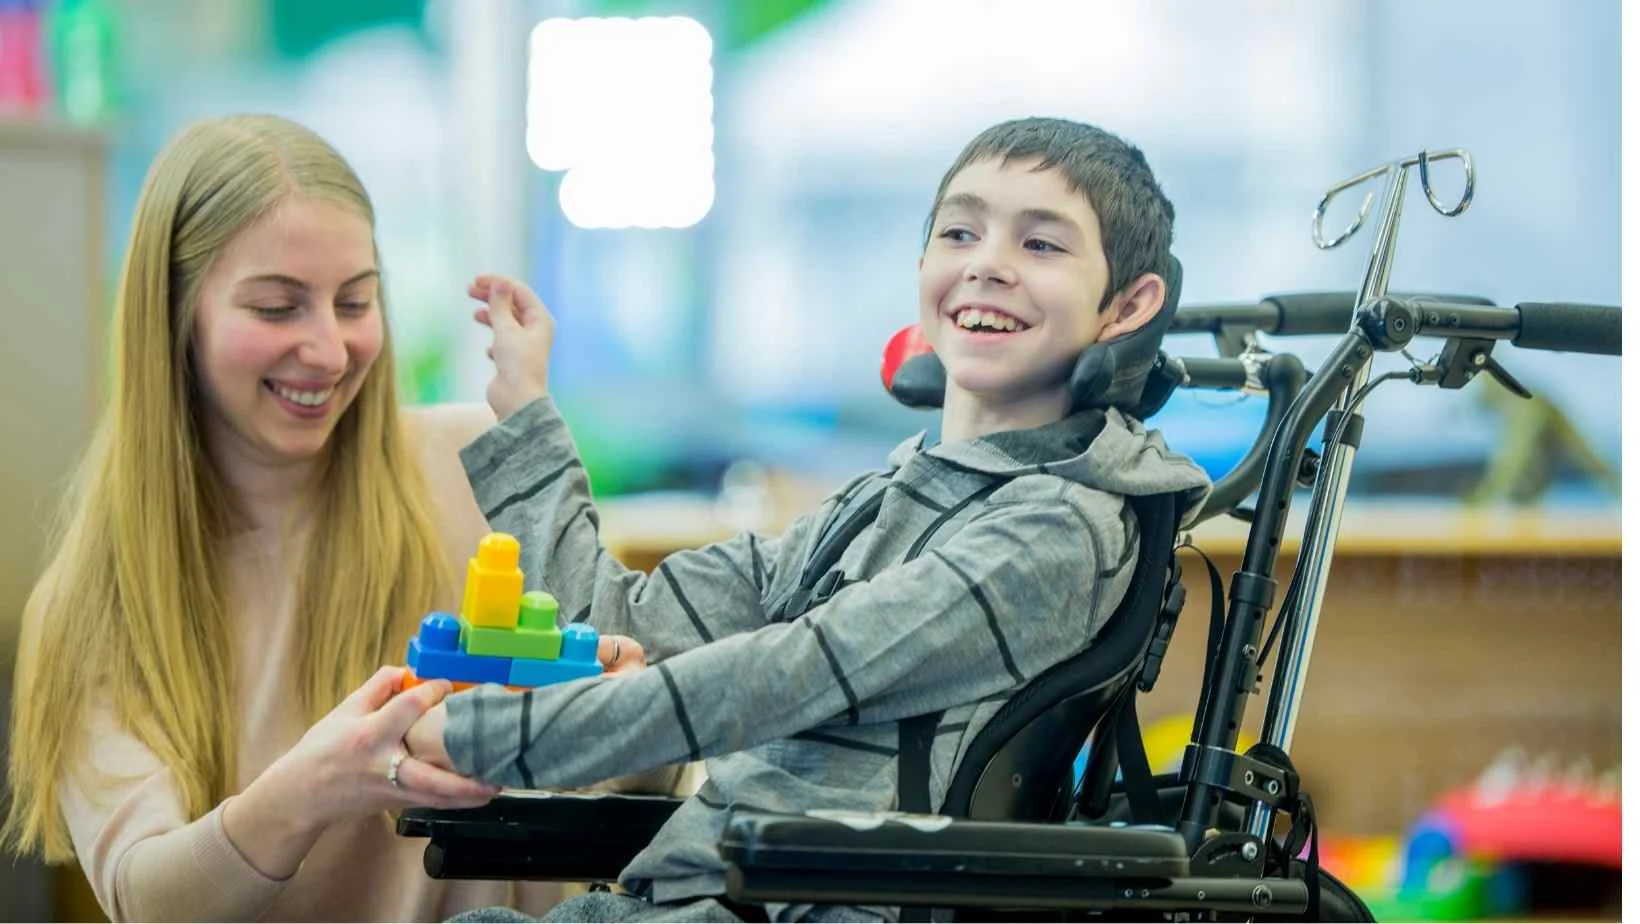 Stock image from canva pro showing a child with cerebral palsy